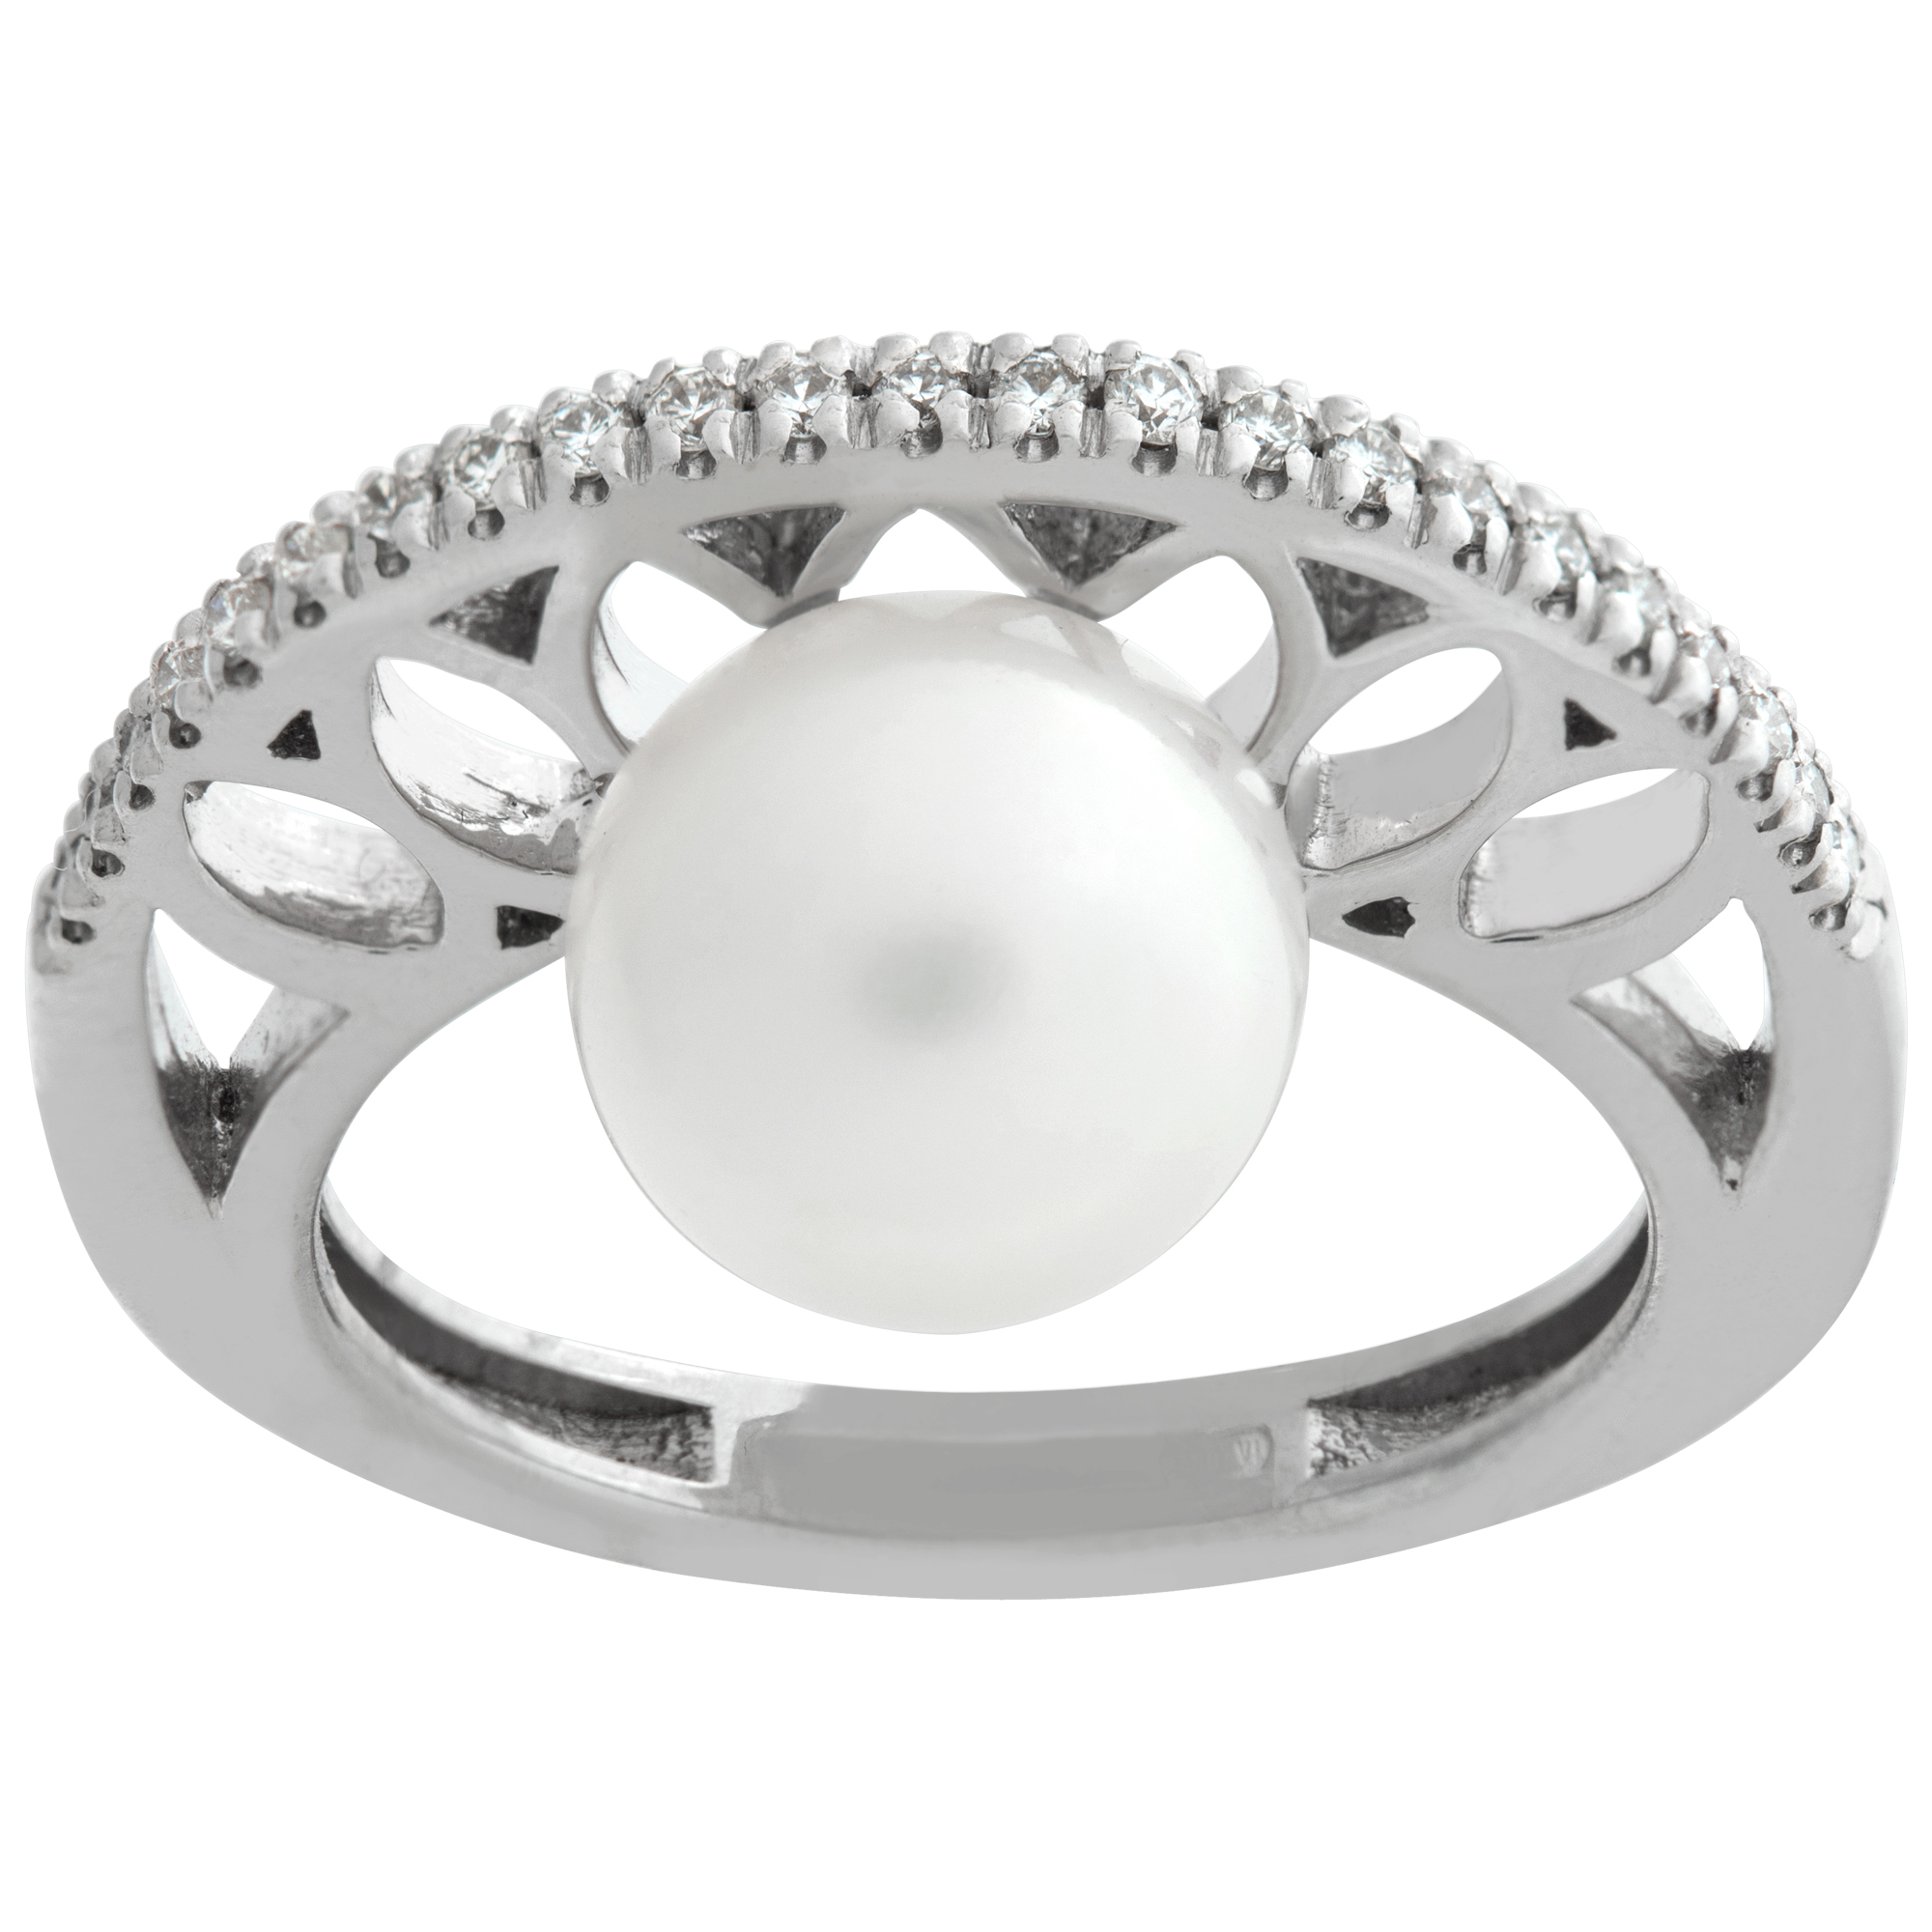 Fresh water pearl (9.5 x10mm) & diamond ring with approx 0.20 carat round cut diamond accents set in 18k white gold. Size 7